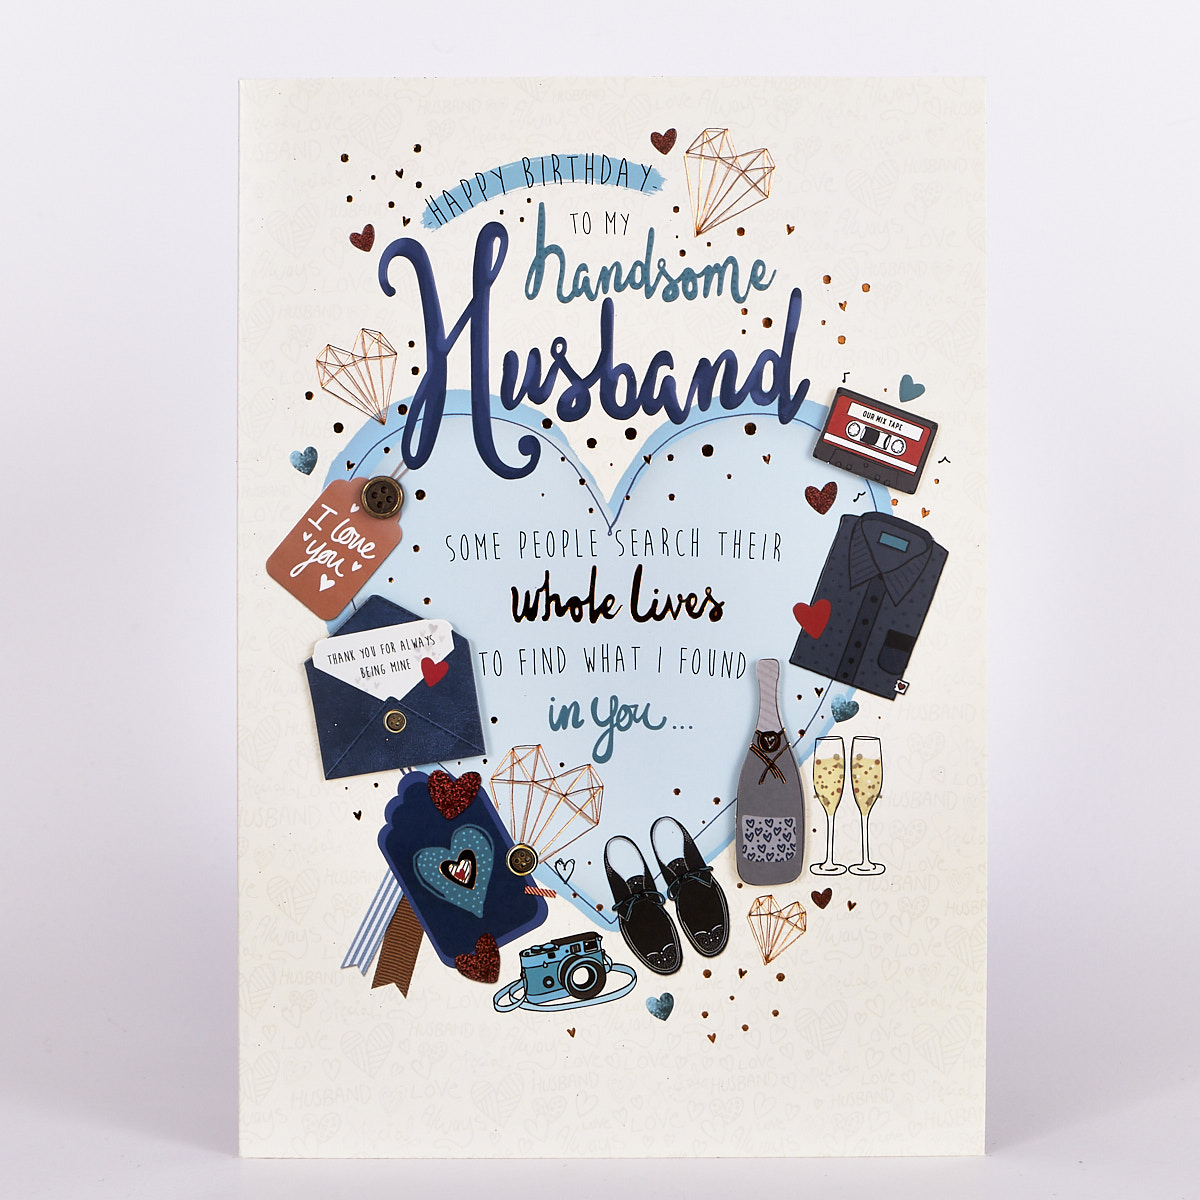 Signature Collection Birthday Card - Handsome Husband